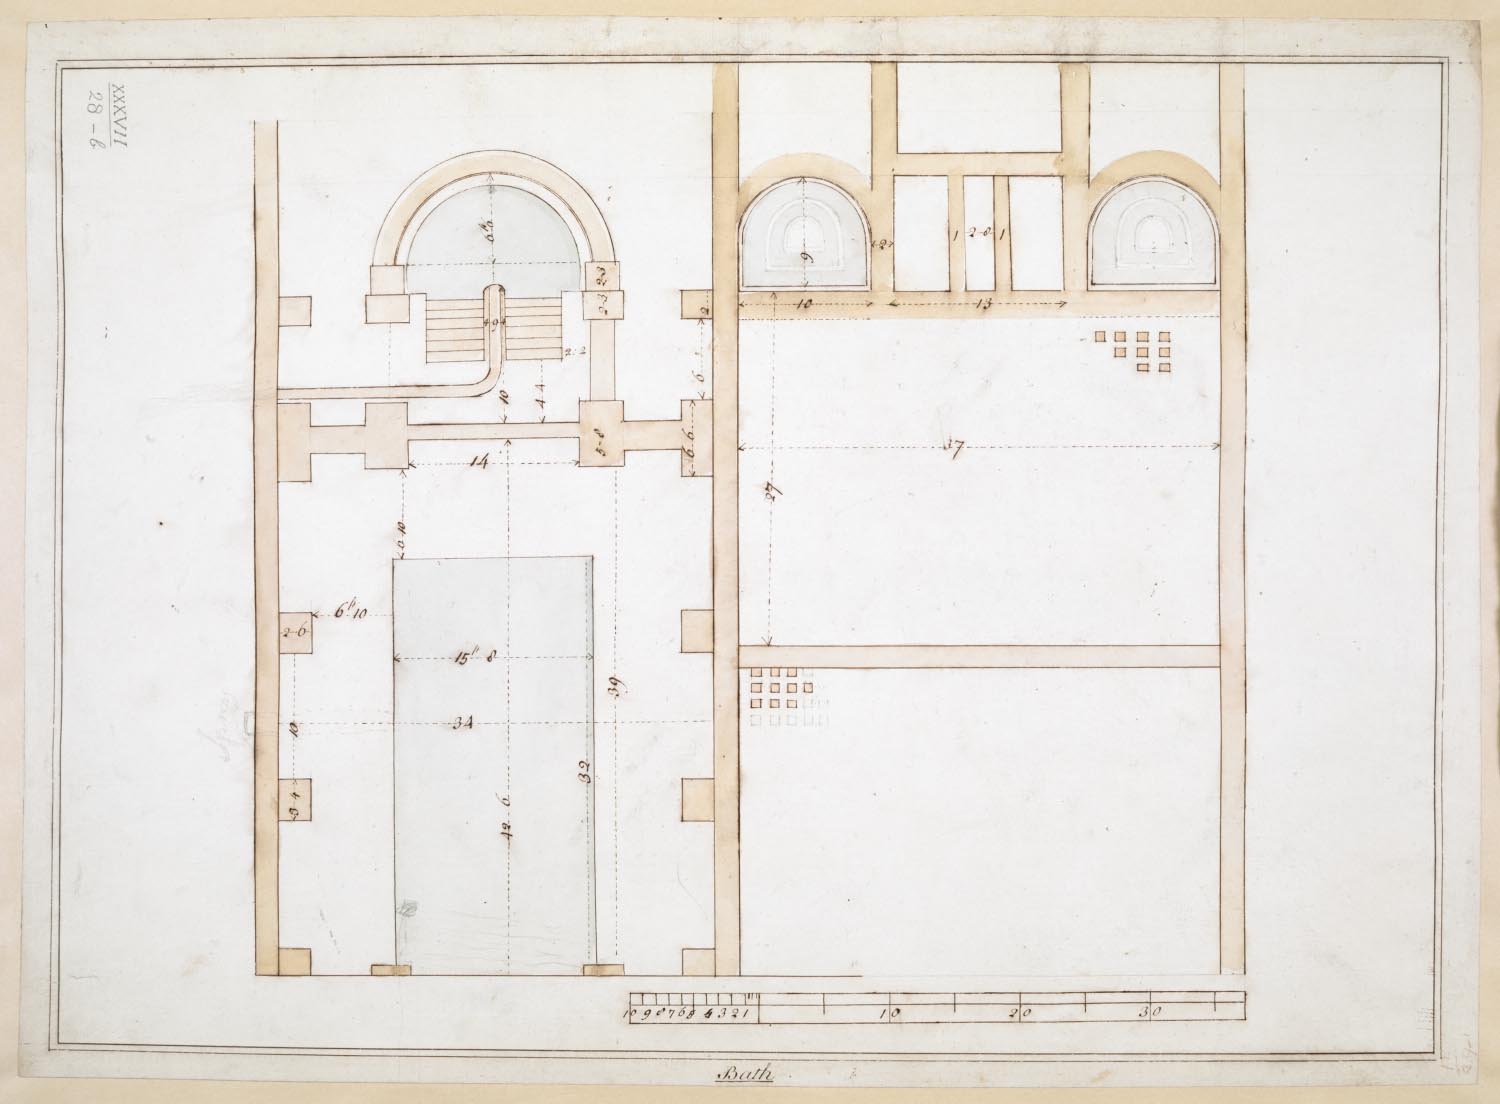 A Colored Plan Of The Roman Baths And Stoves Discovered In 1755